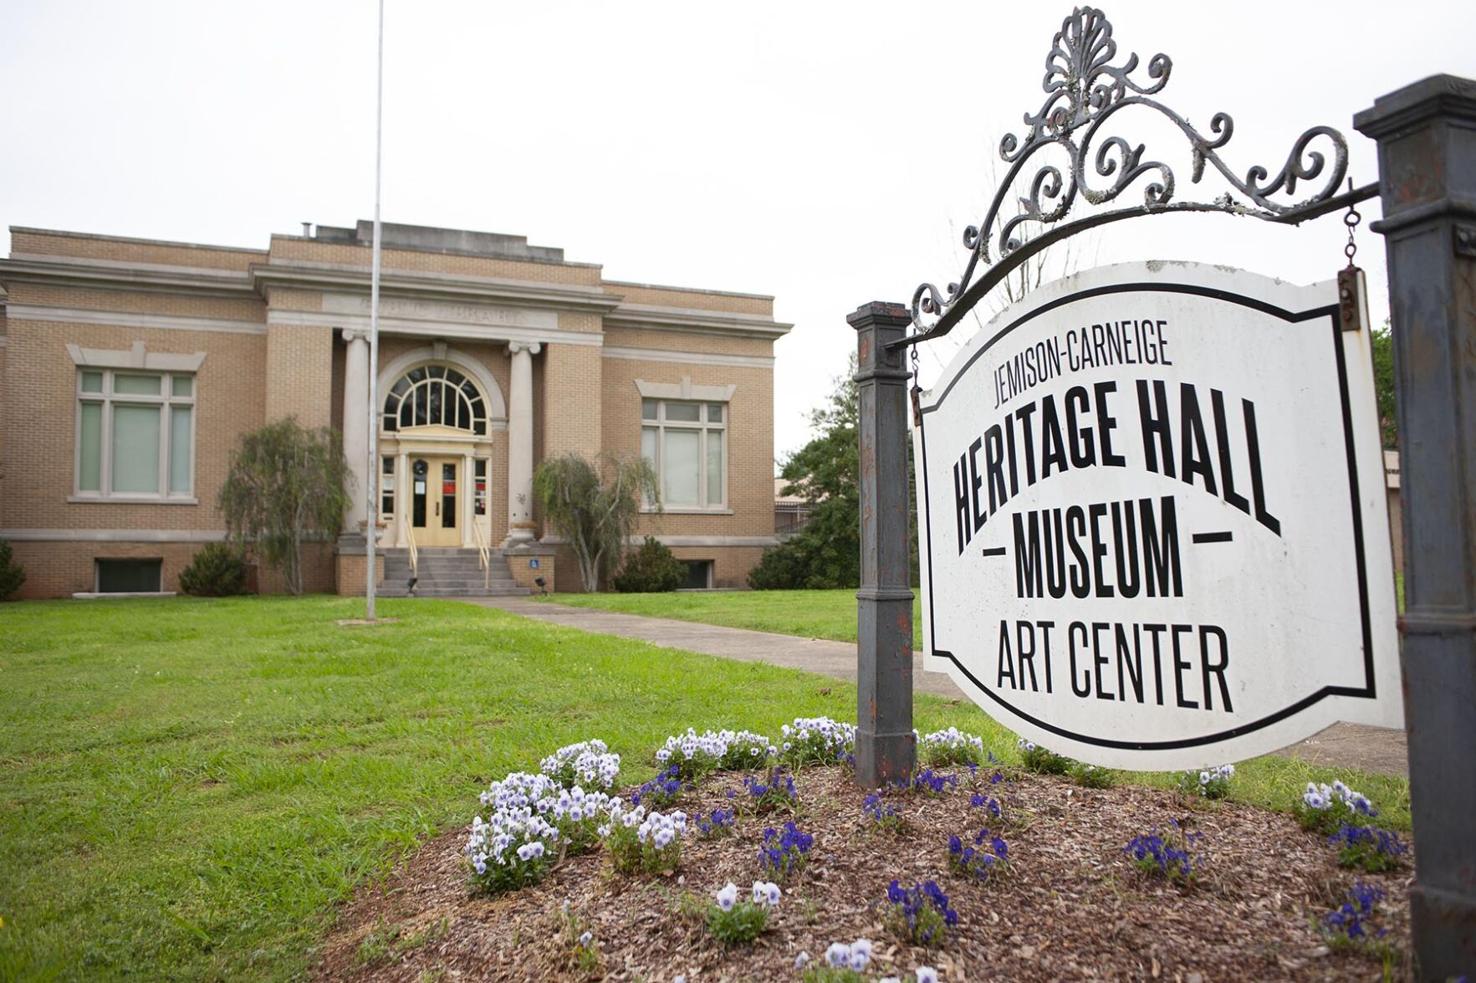 Heritage Hall Holiday Market returns The Daily Home